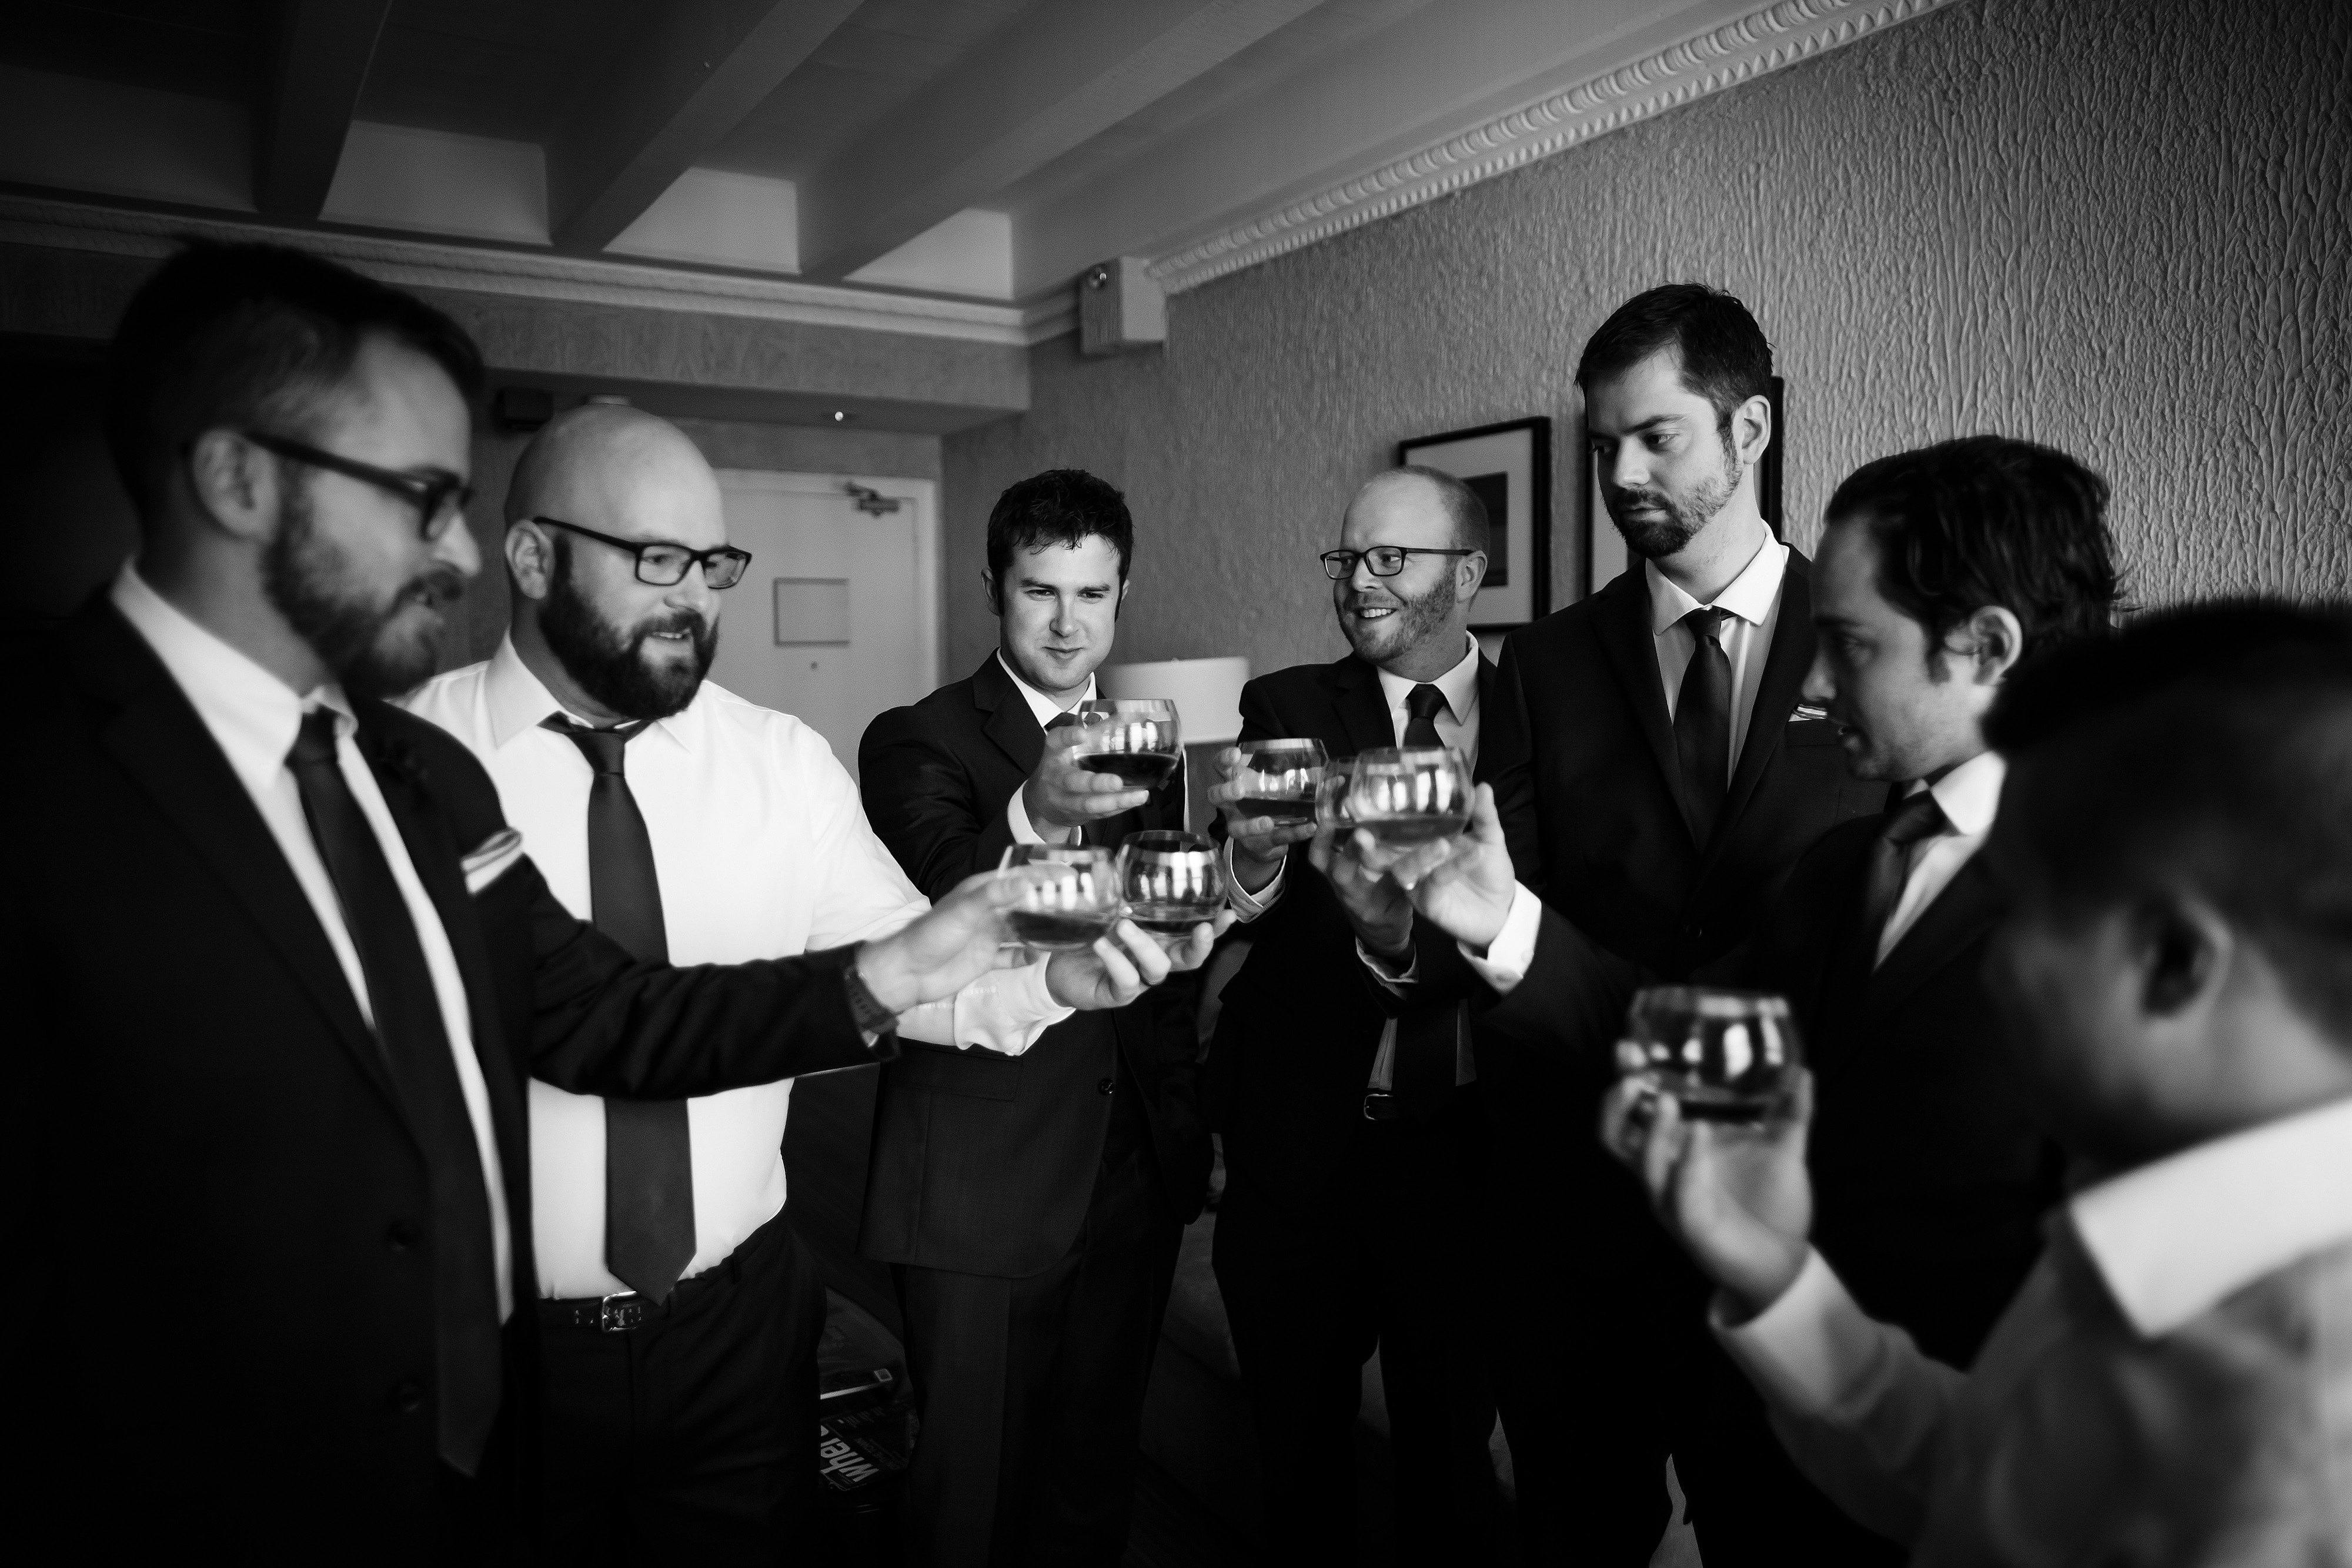 The groom and groomsmen share a drink before the ceremony